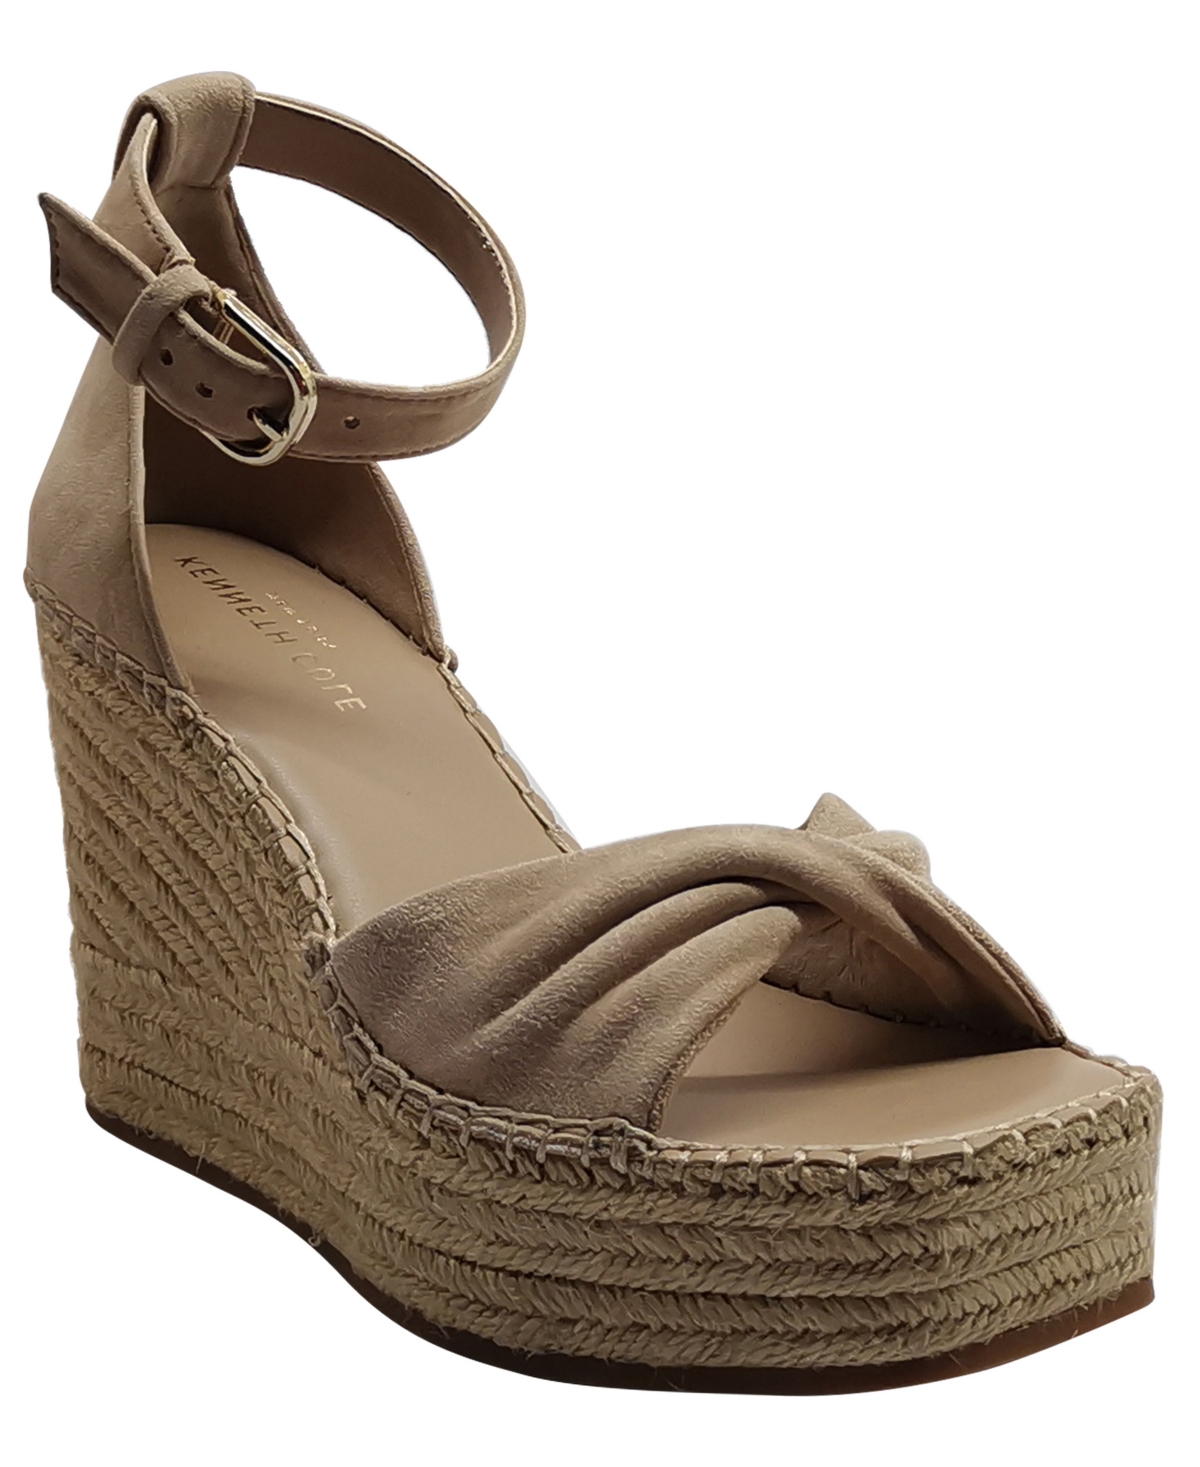 KENNETH COLE NEW YORK WOMEN'S SOL ESPADRILLE WEDGE SANDALS WOMEN'S SHOES